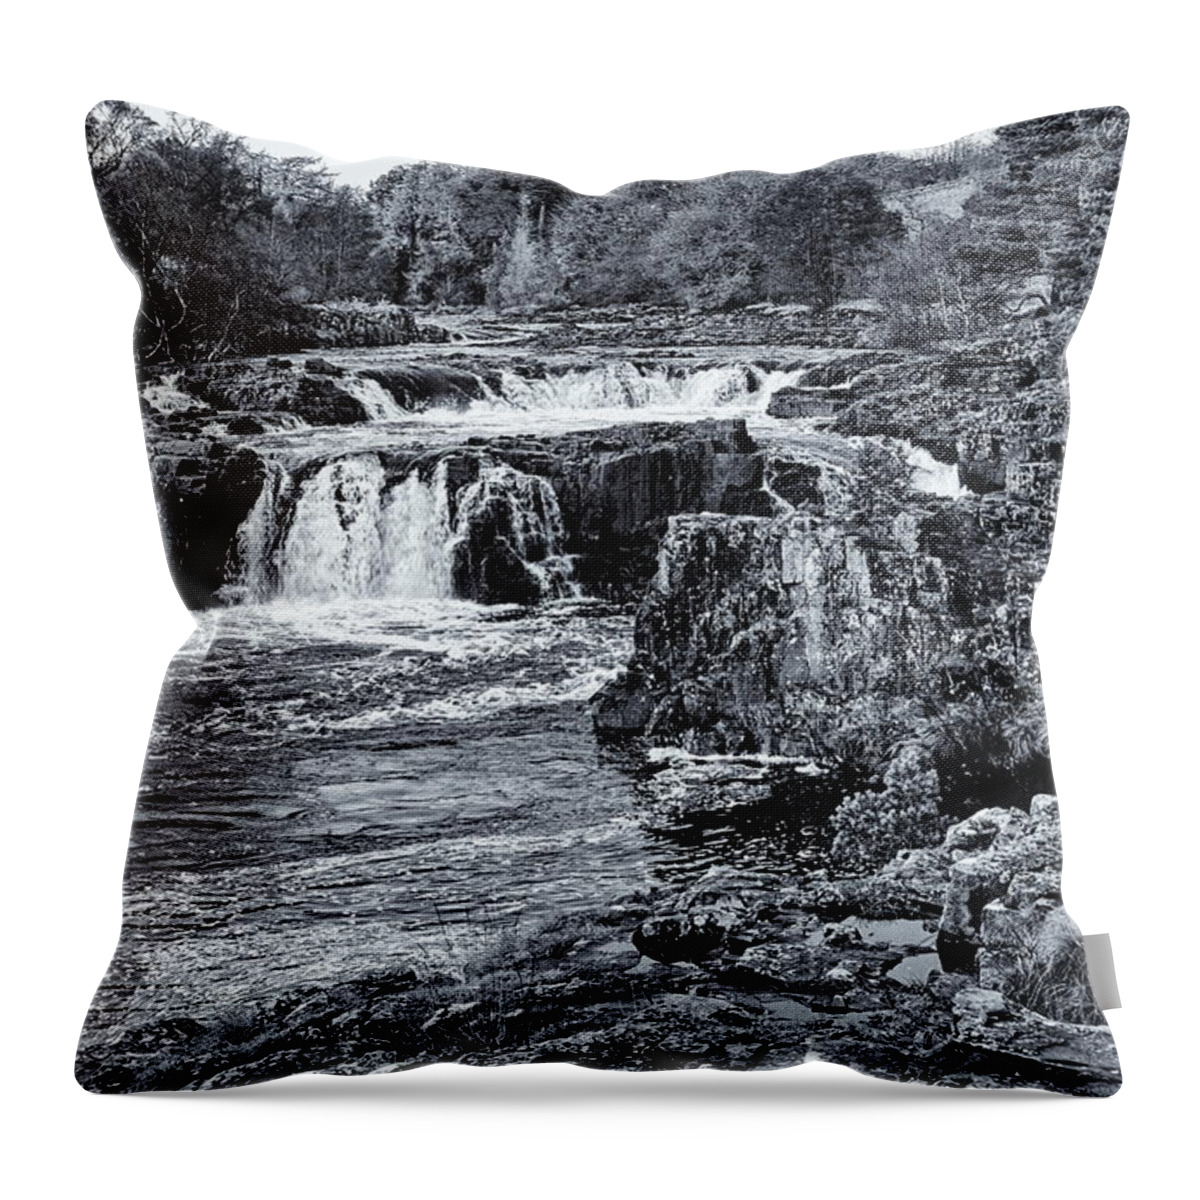 Low Force Throw Pillow featuring the photograph Waterfall Black and White by Jeff Townsend